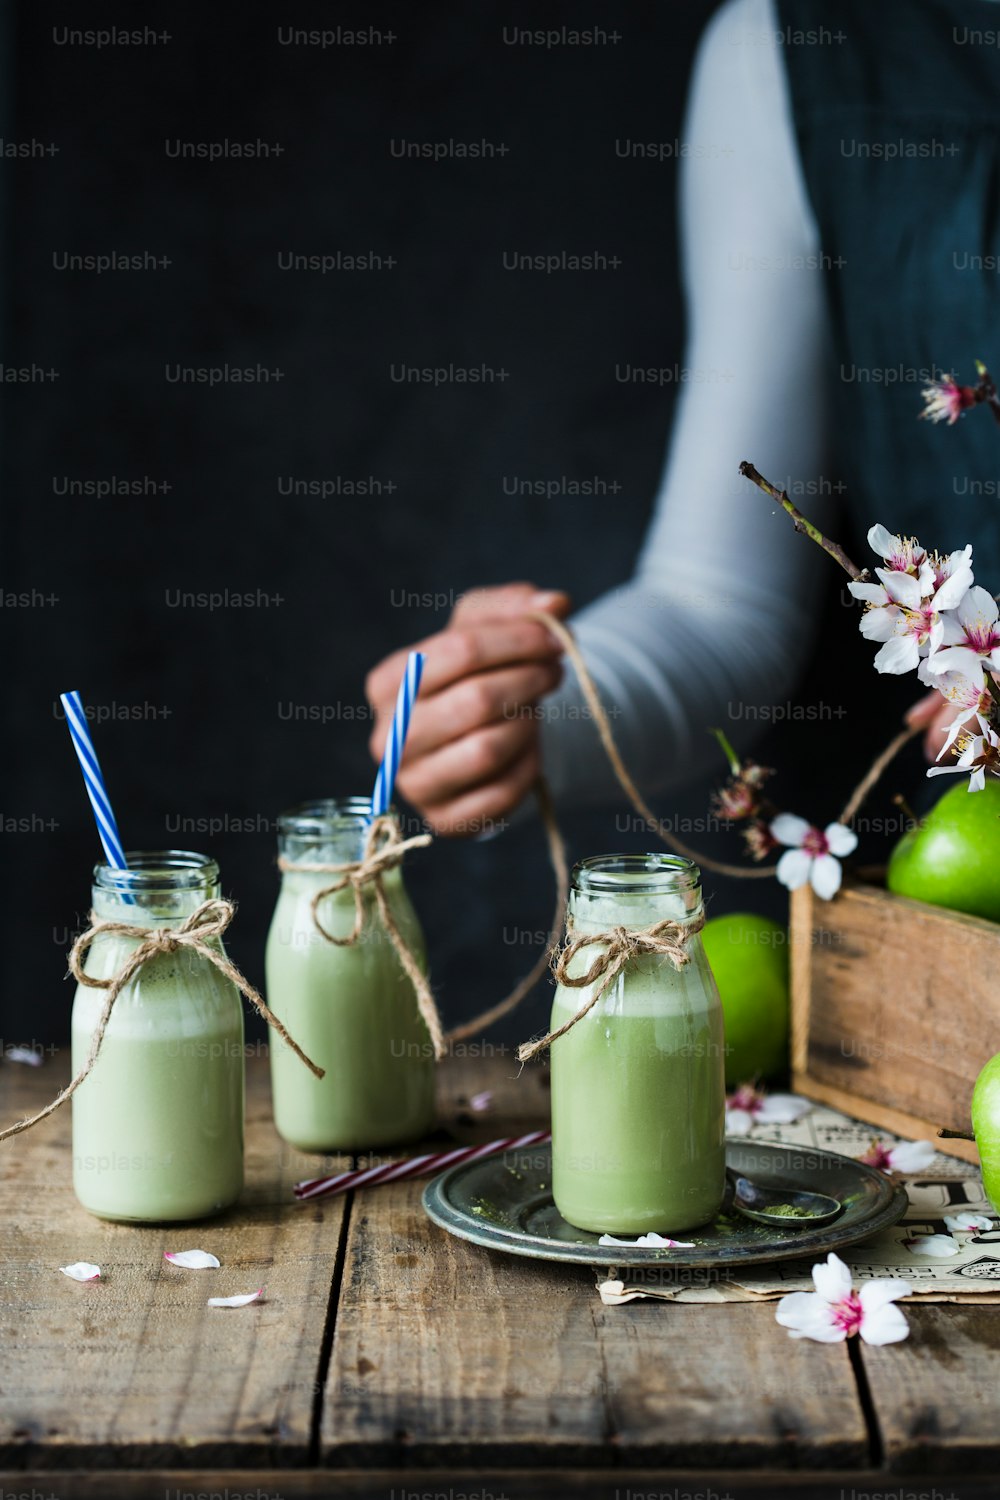 a person holding a straw in front of three jars filled with green liquid